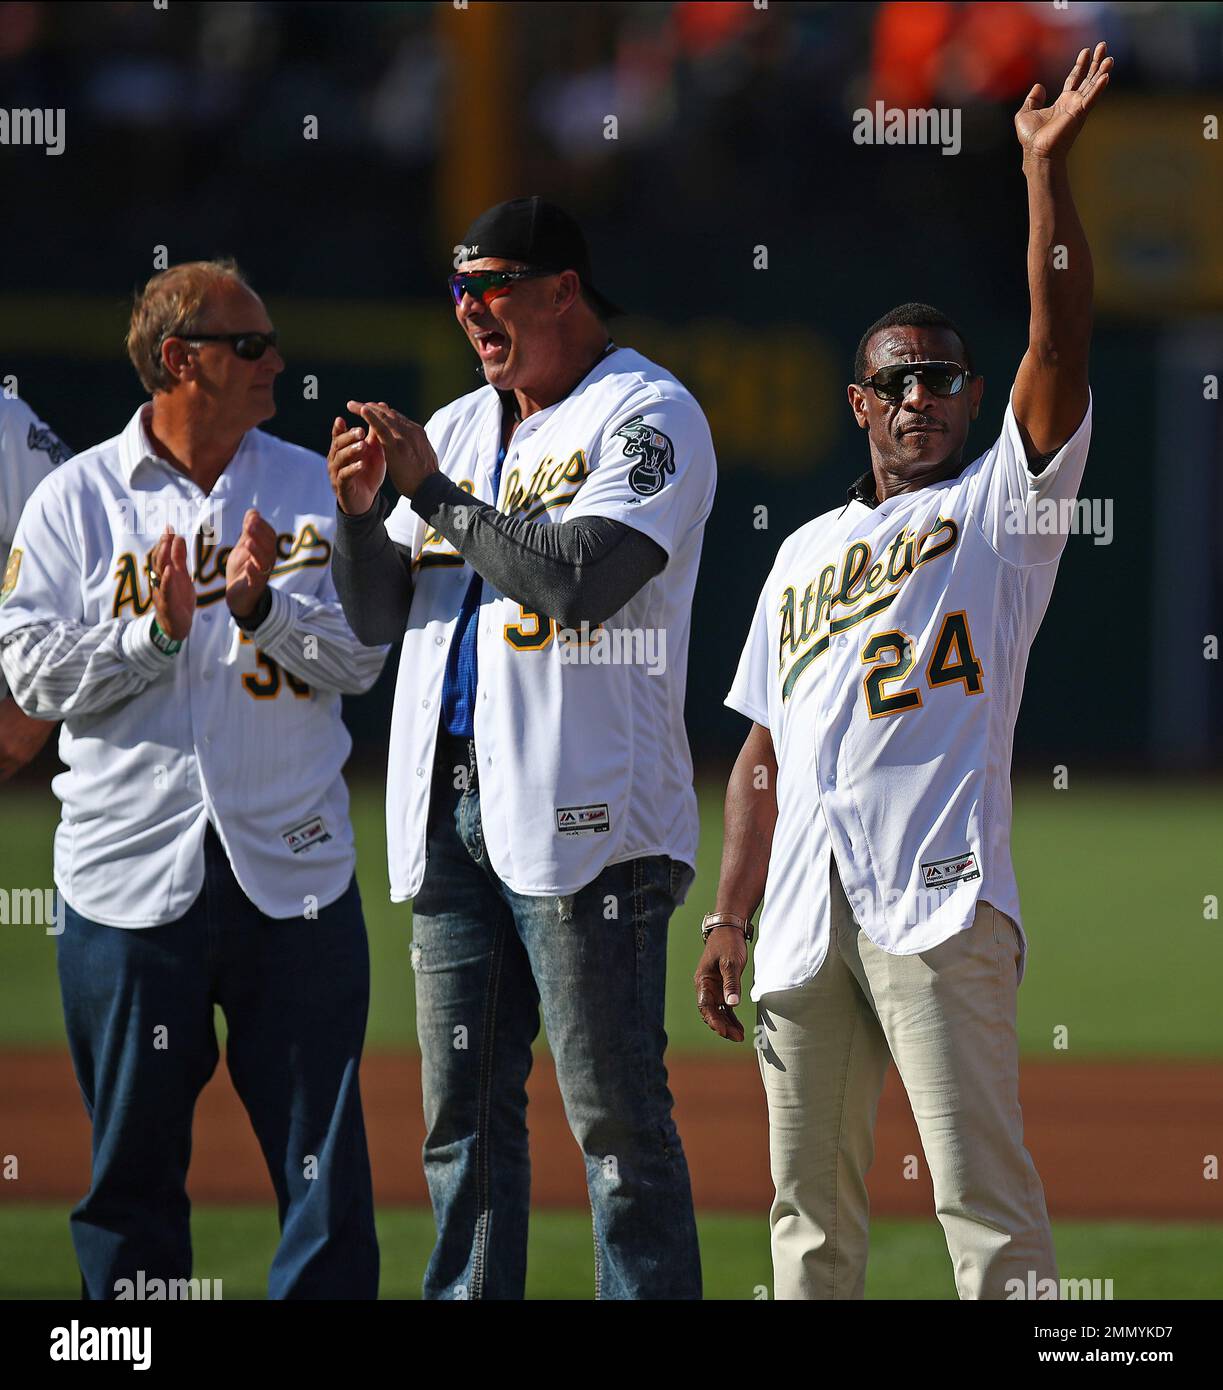 Canseco comes back to Coliseum for '89 reunion